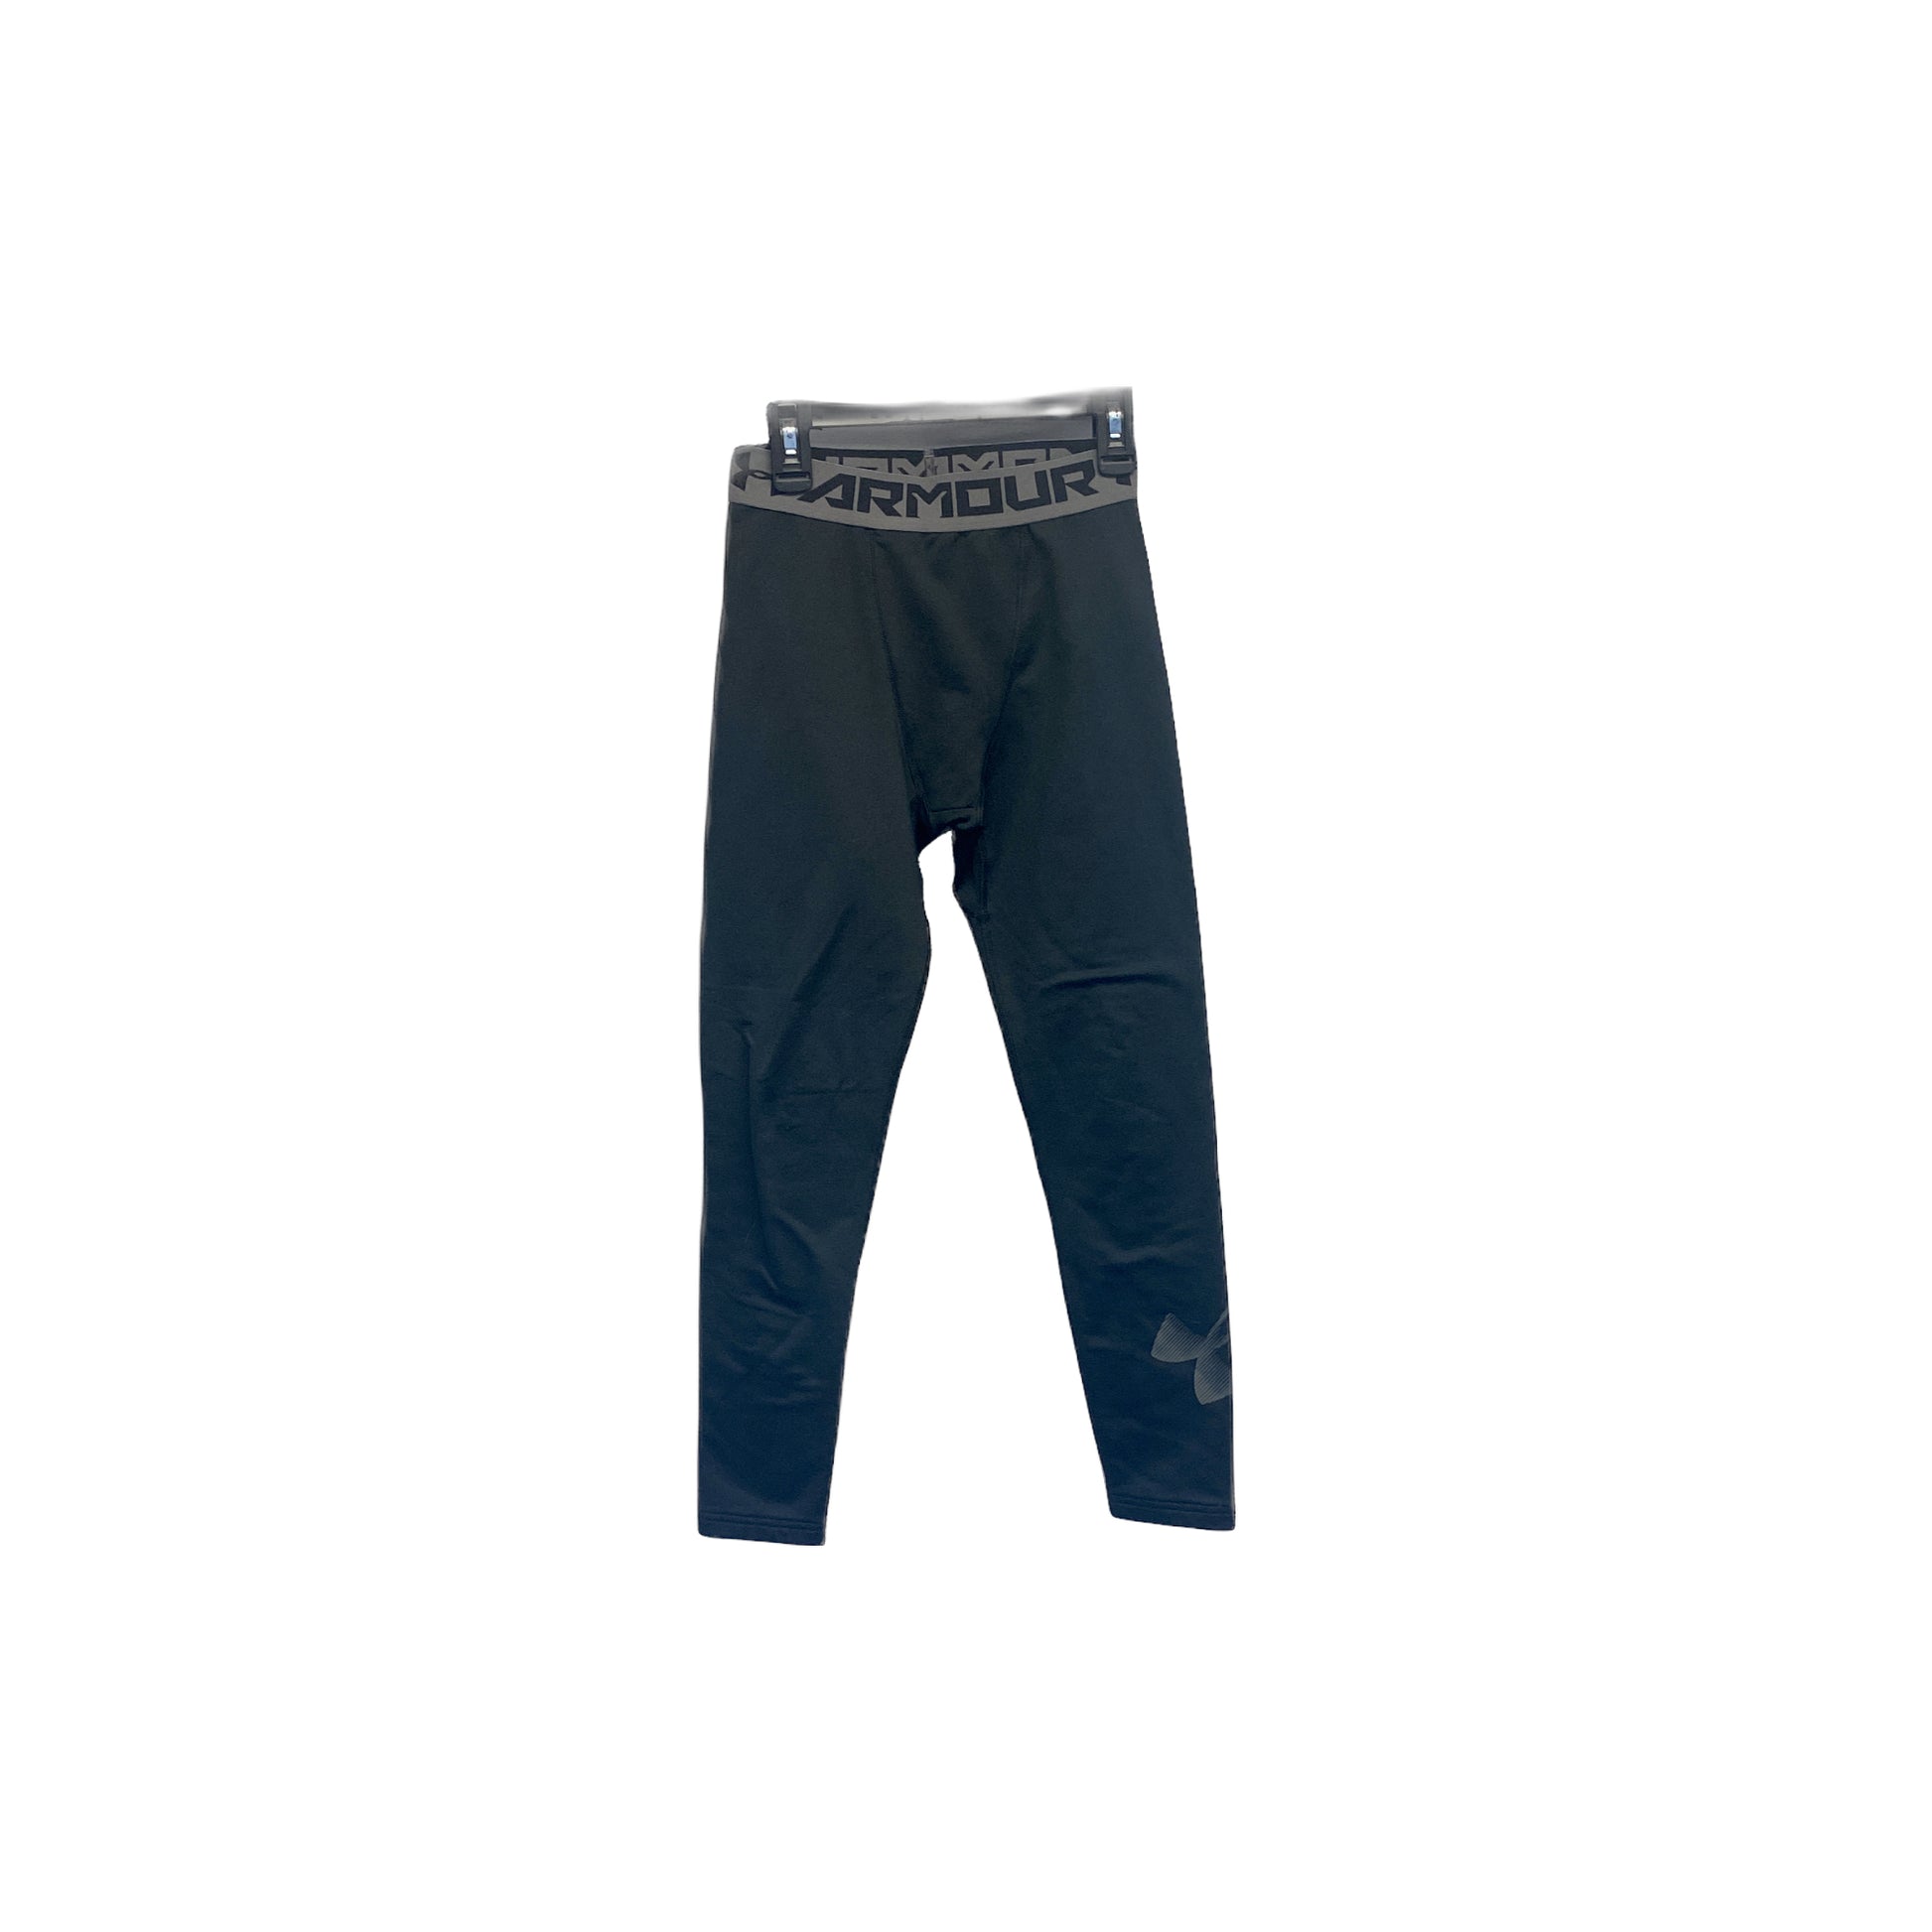 Armour Coldgear fitted pants – in the Lowell